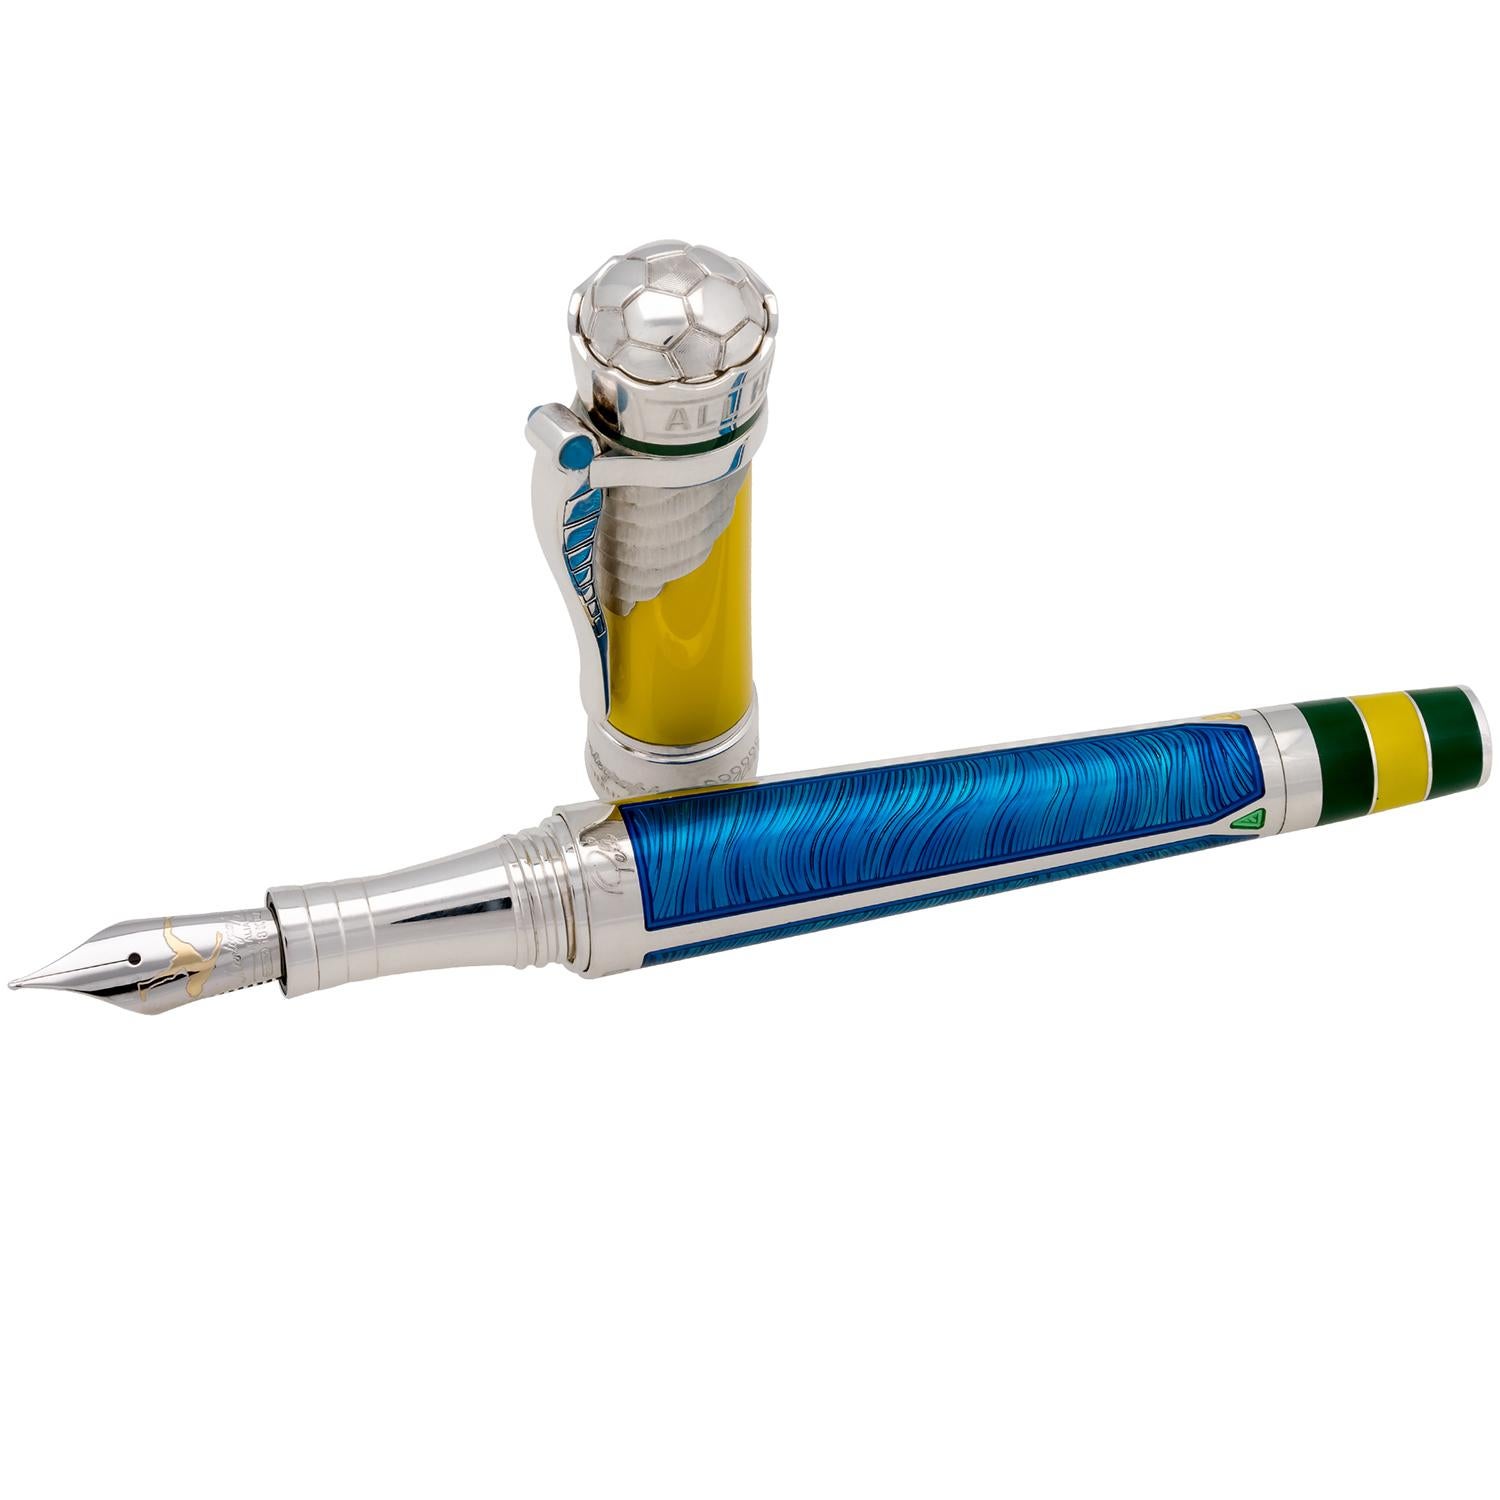 In honor of one of the most celebrated sportsmen of the 20th century, Montegrappa presented this exquisite limited edition fountain pen in the colors of his home country. Made of blue and yellow resin with sterling silver trim and 18K yellow gold